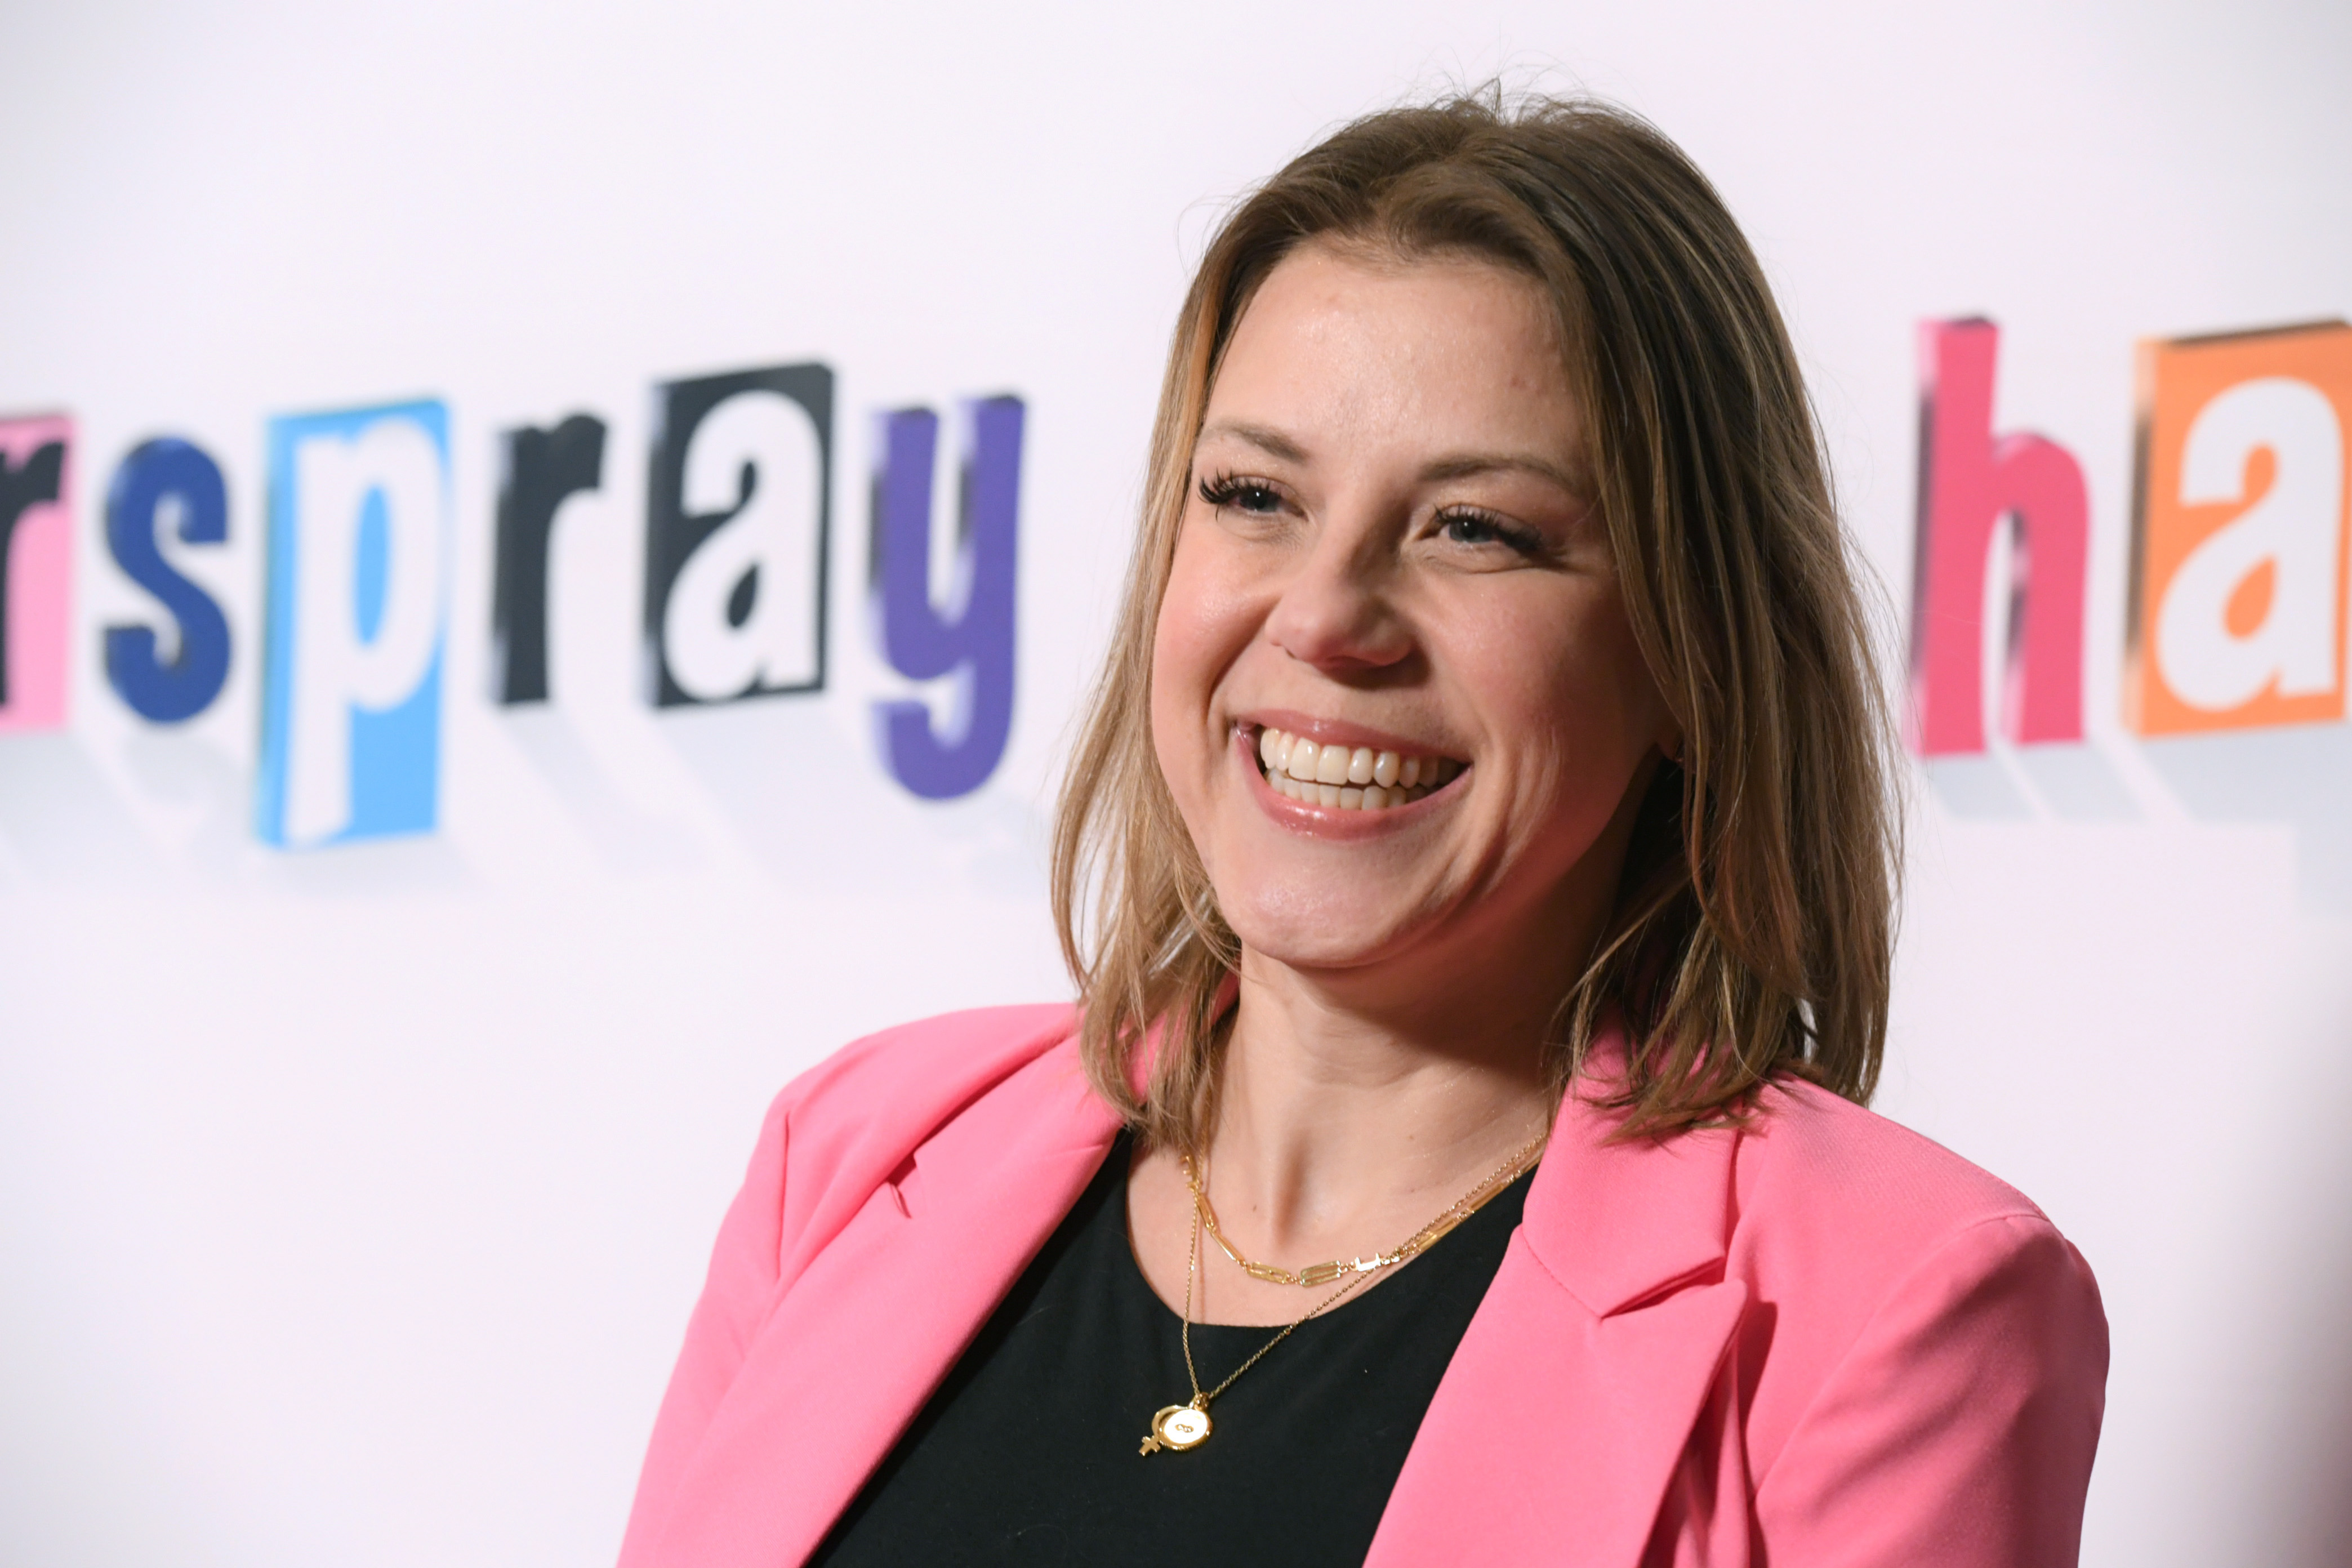 Jodie Sweetin at the Los Angeles opening night performance of the musical "Hairspray" on May 2, 2023, in Hollywood, California. | Source: Getty Images